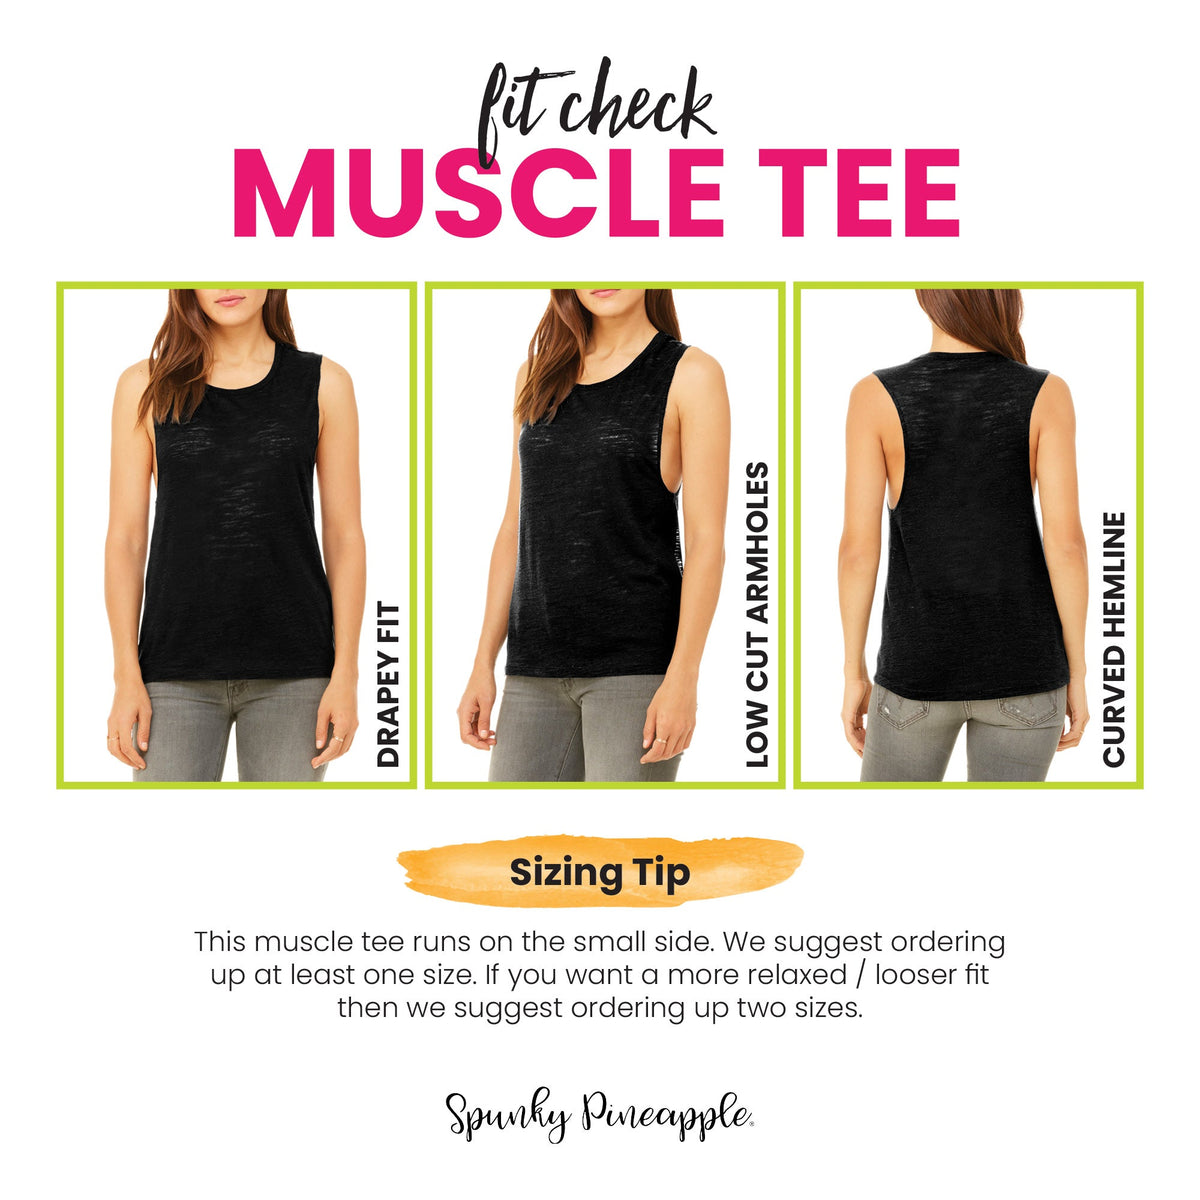 Witch Way to the Barre Muscle Tee